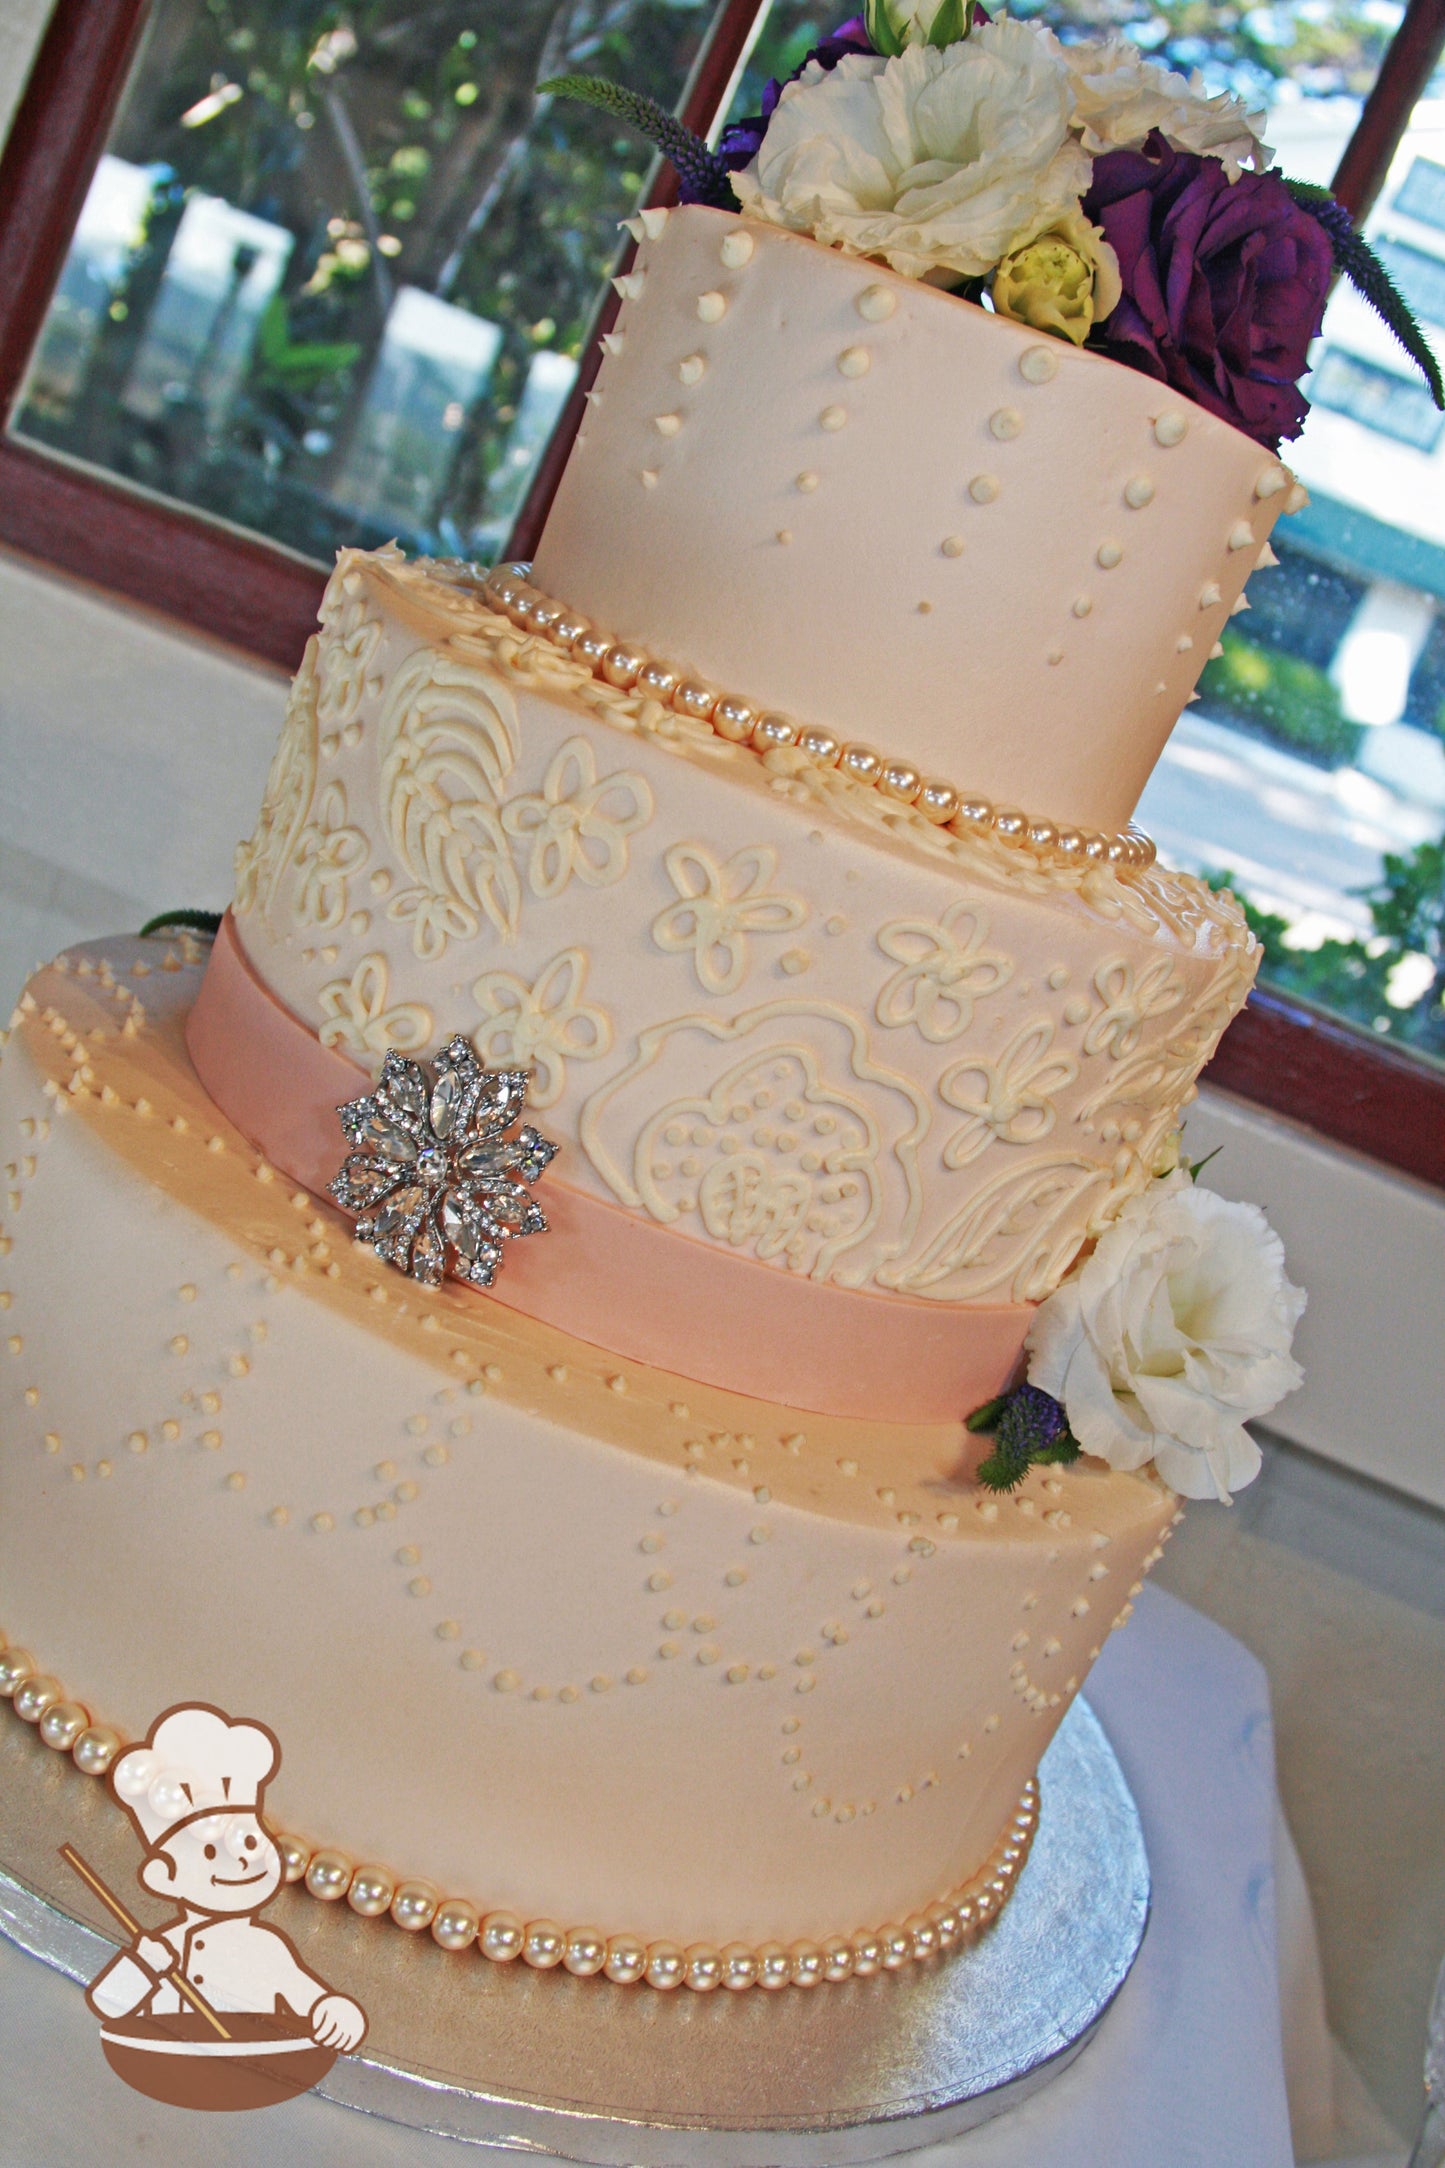 3-tier cake with smooth white icing and decorated with different white buttercream piping's and a light-pink fondant band and pearl beads.